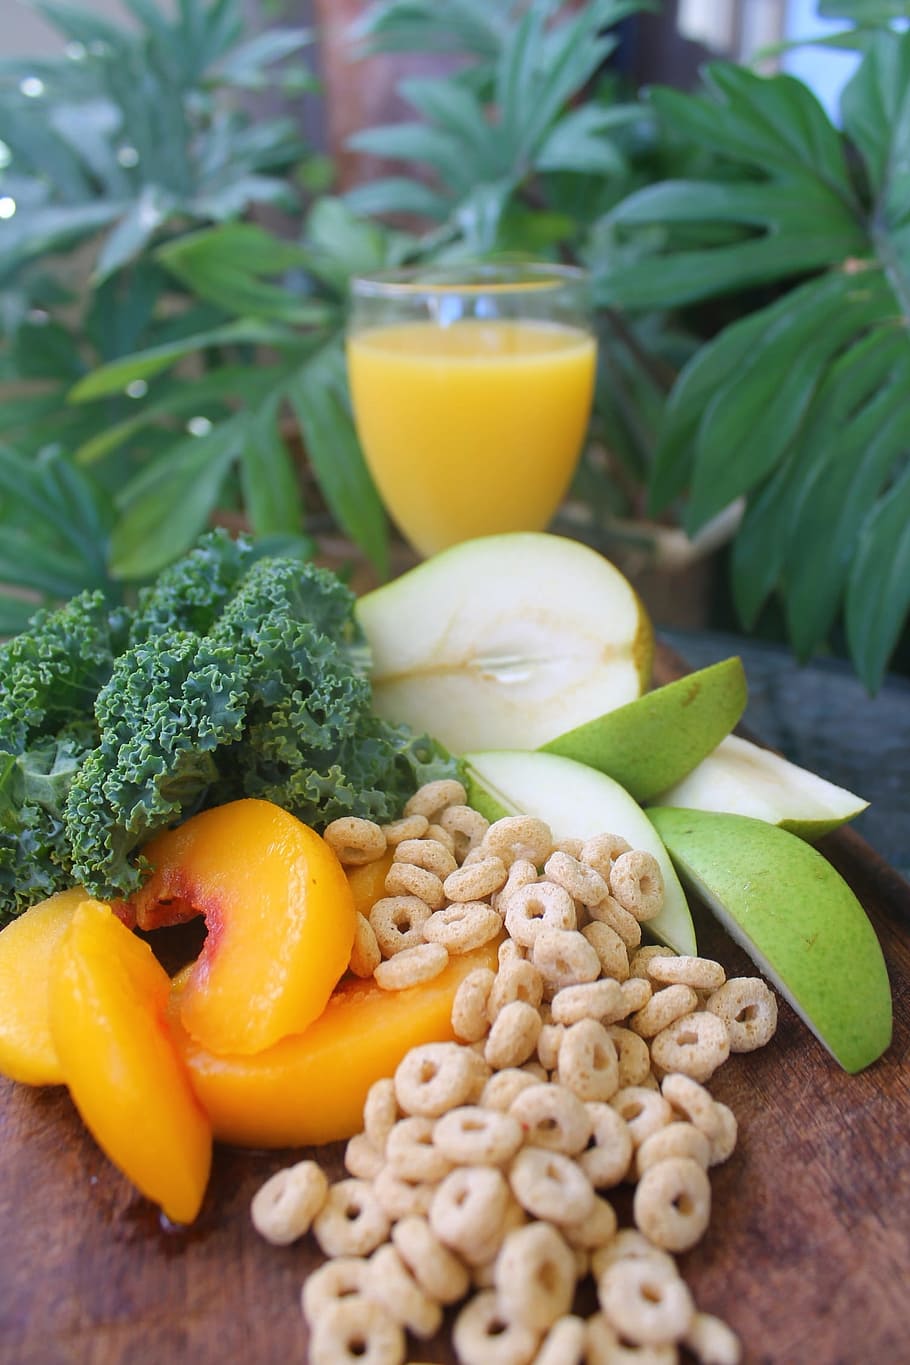 cereal, sliced, fruits, Healthy, Lifestyle, Juicing, Smoothie, healthy, lifestyle, blend, fresh